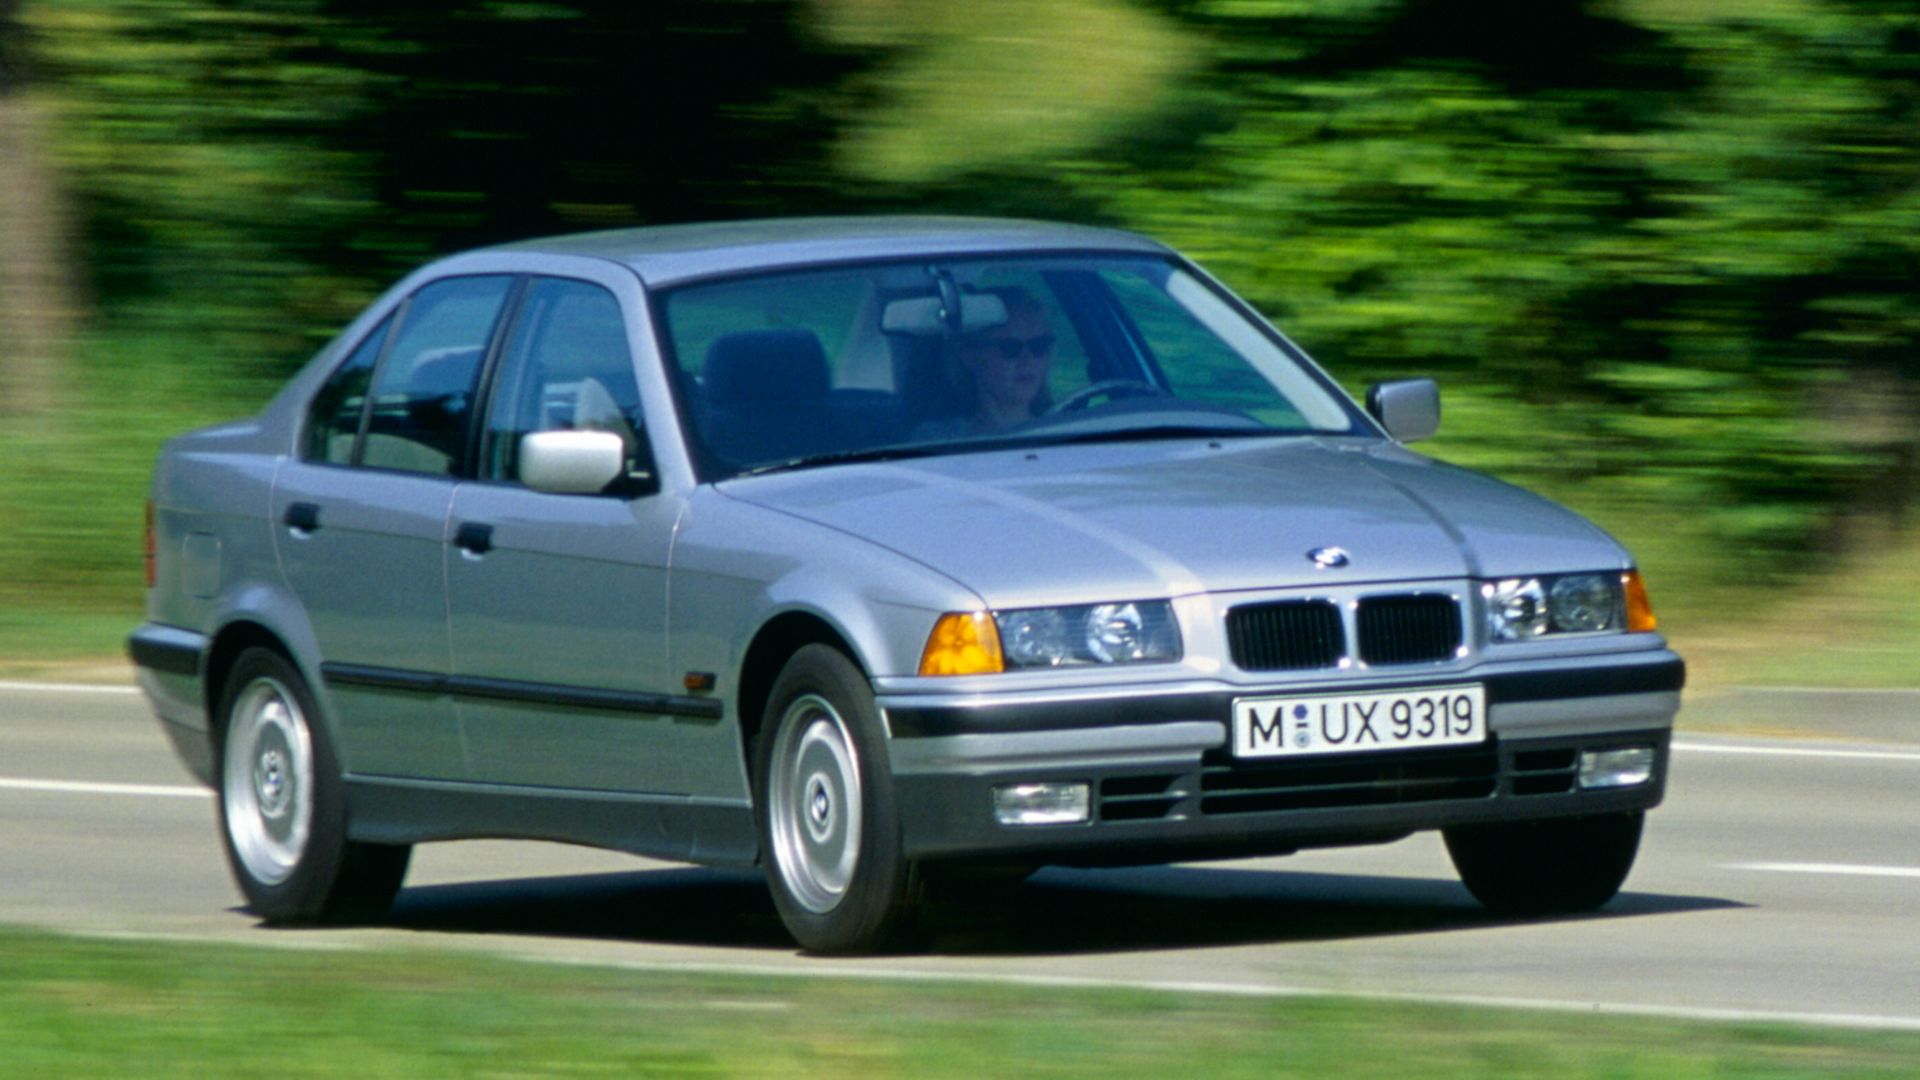 Cool project car options you must buy: BMW E36 3 Series